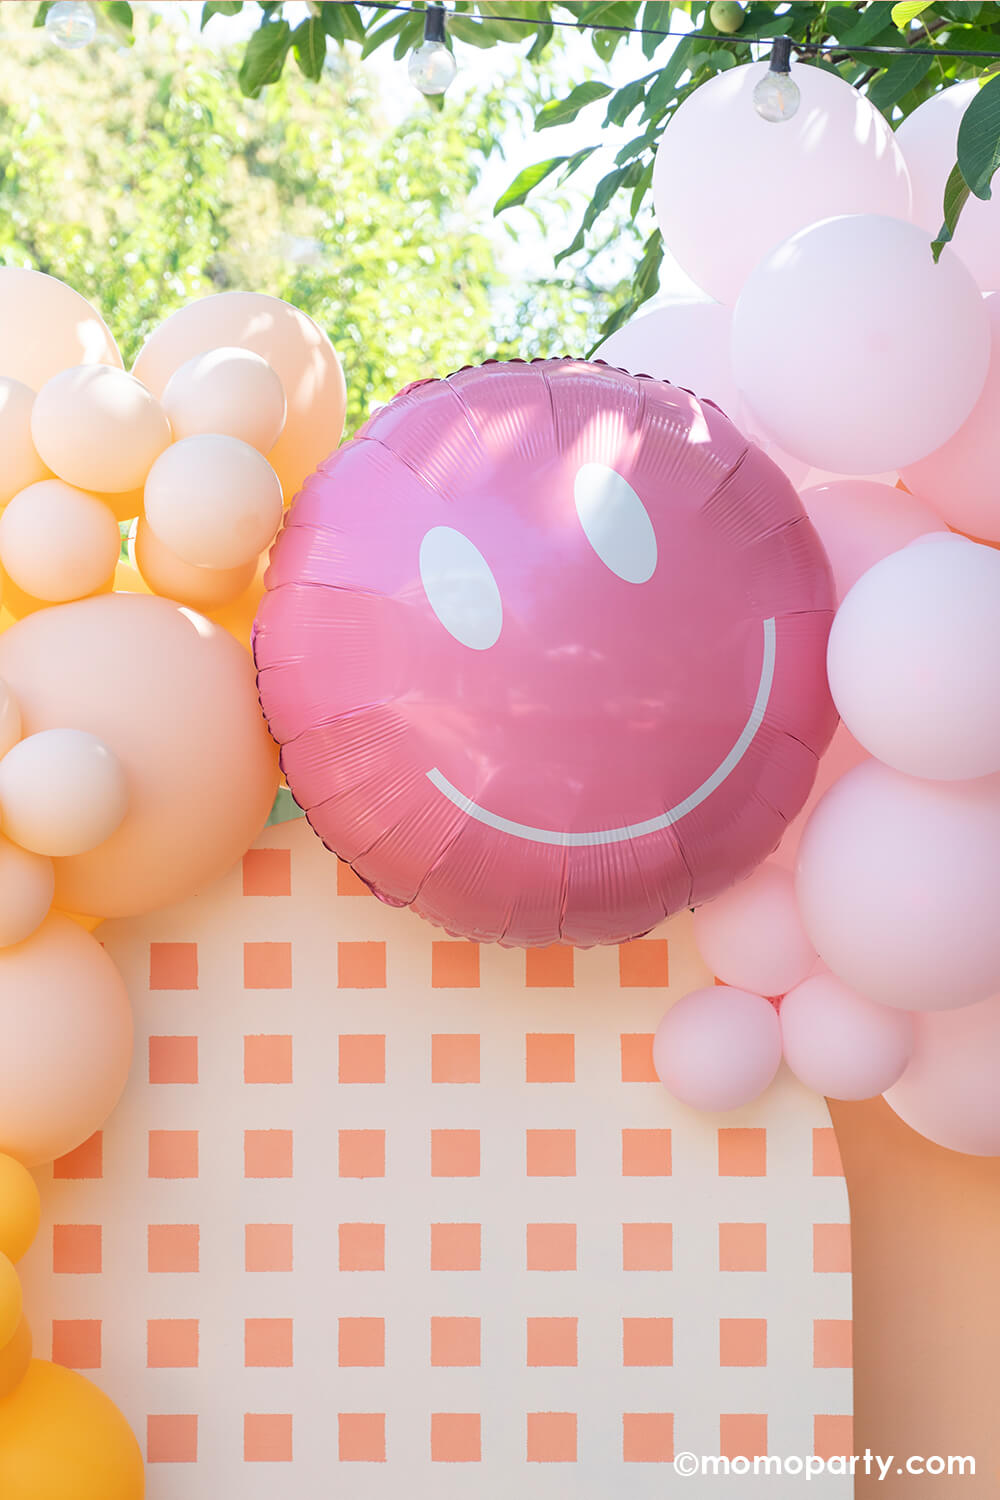 Momo Party One Groovy Baby First Birthday Party Backdrop board with 30" Rosy Smiley face foil balloon by Tuftex Balloons, latex balloon decorations with peach, pink, goldnod colors. This decoration is such a stand out backdrop and photo booth for a Groovy birthday parties, baby showers, and most any other joyful event